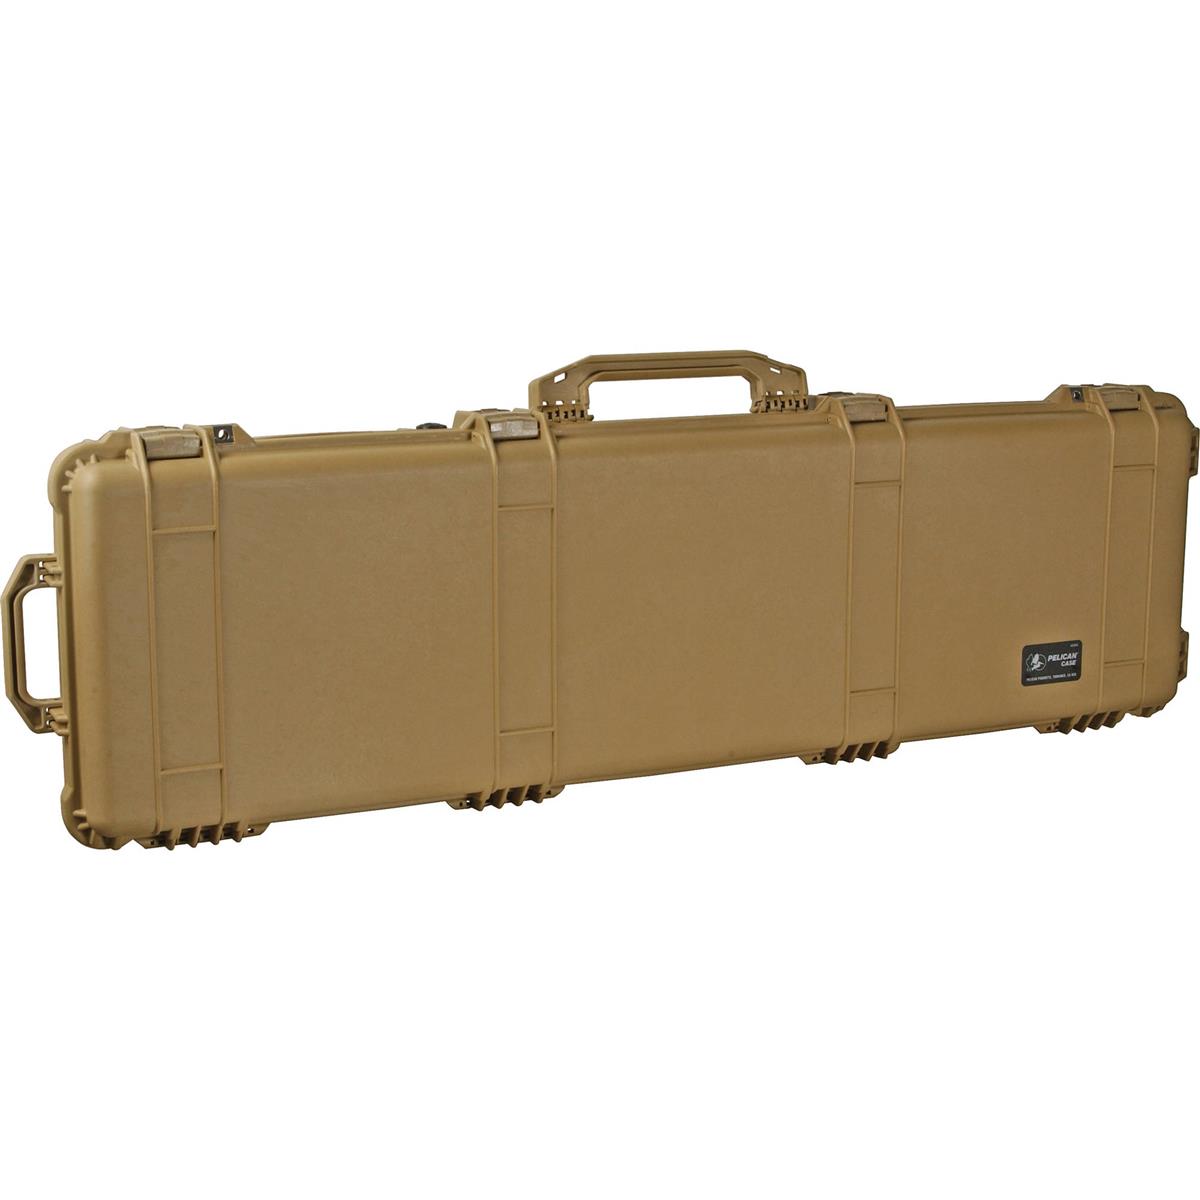 Image of Pelican 1720NF Travel Vault Wheeled Weapons Case without Foam Insert